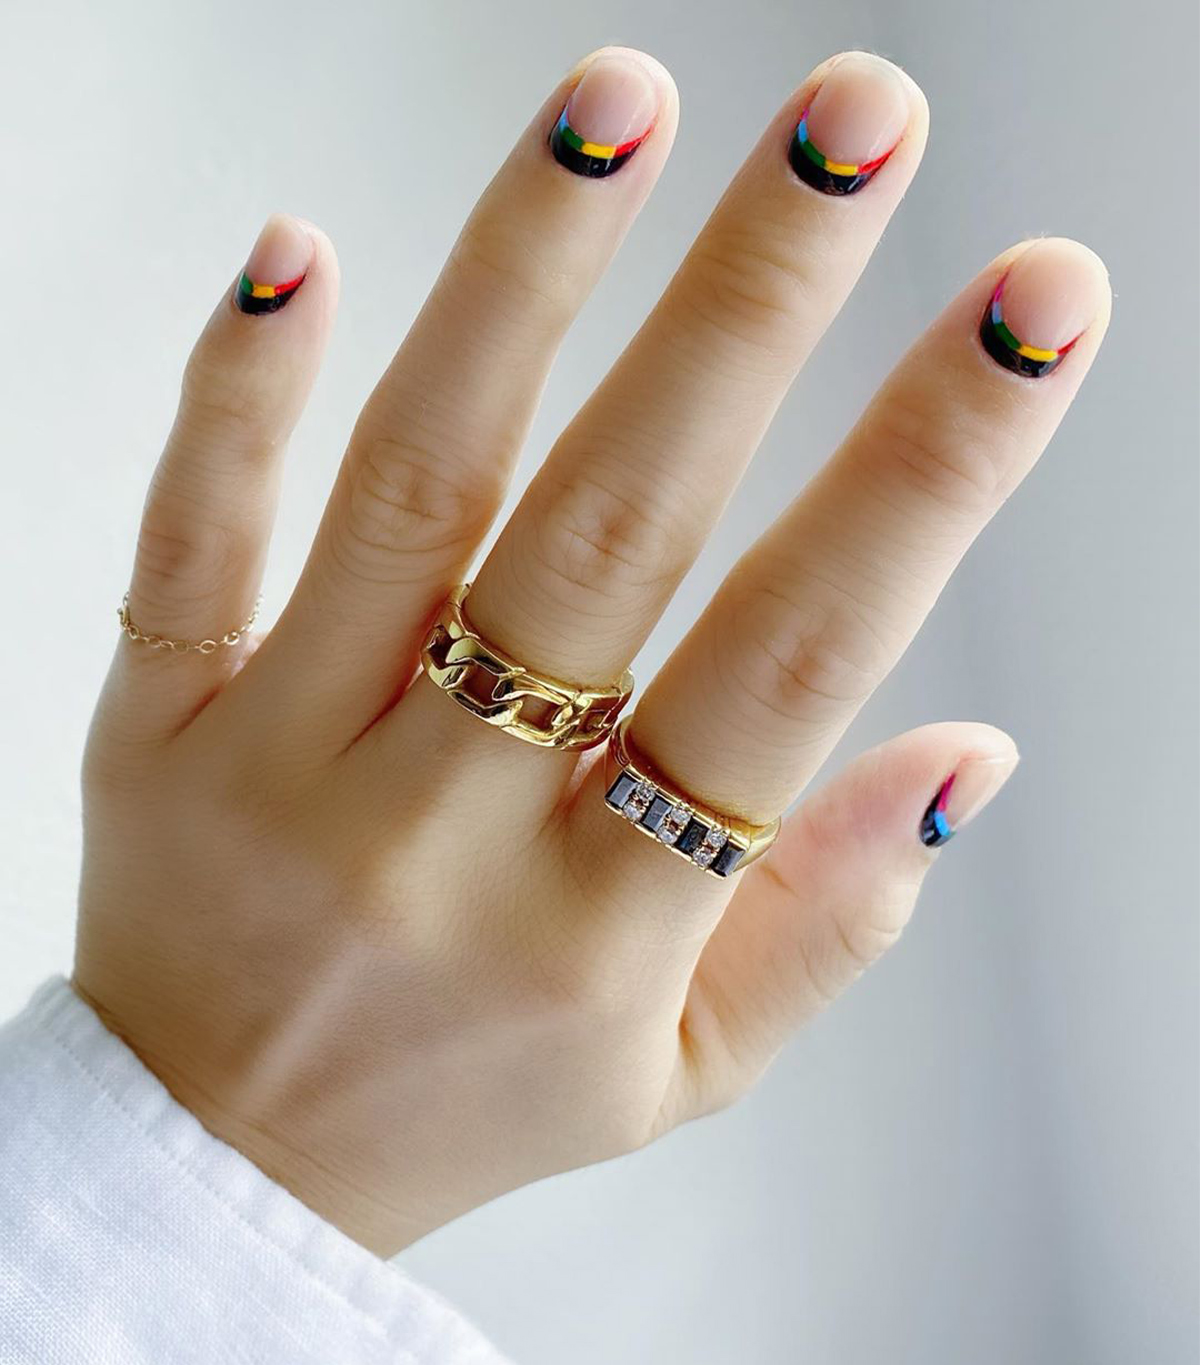 13 Short Nail Designs That Are So Easy to Do | Who What Wear